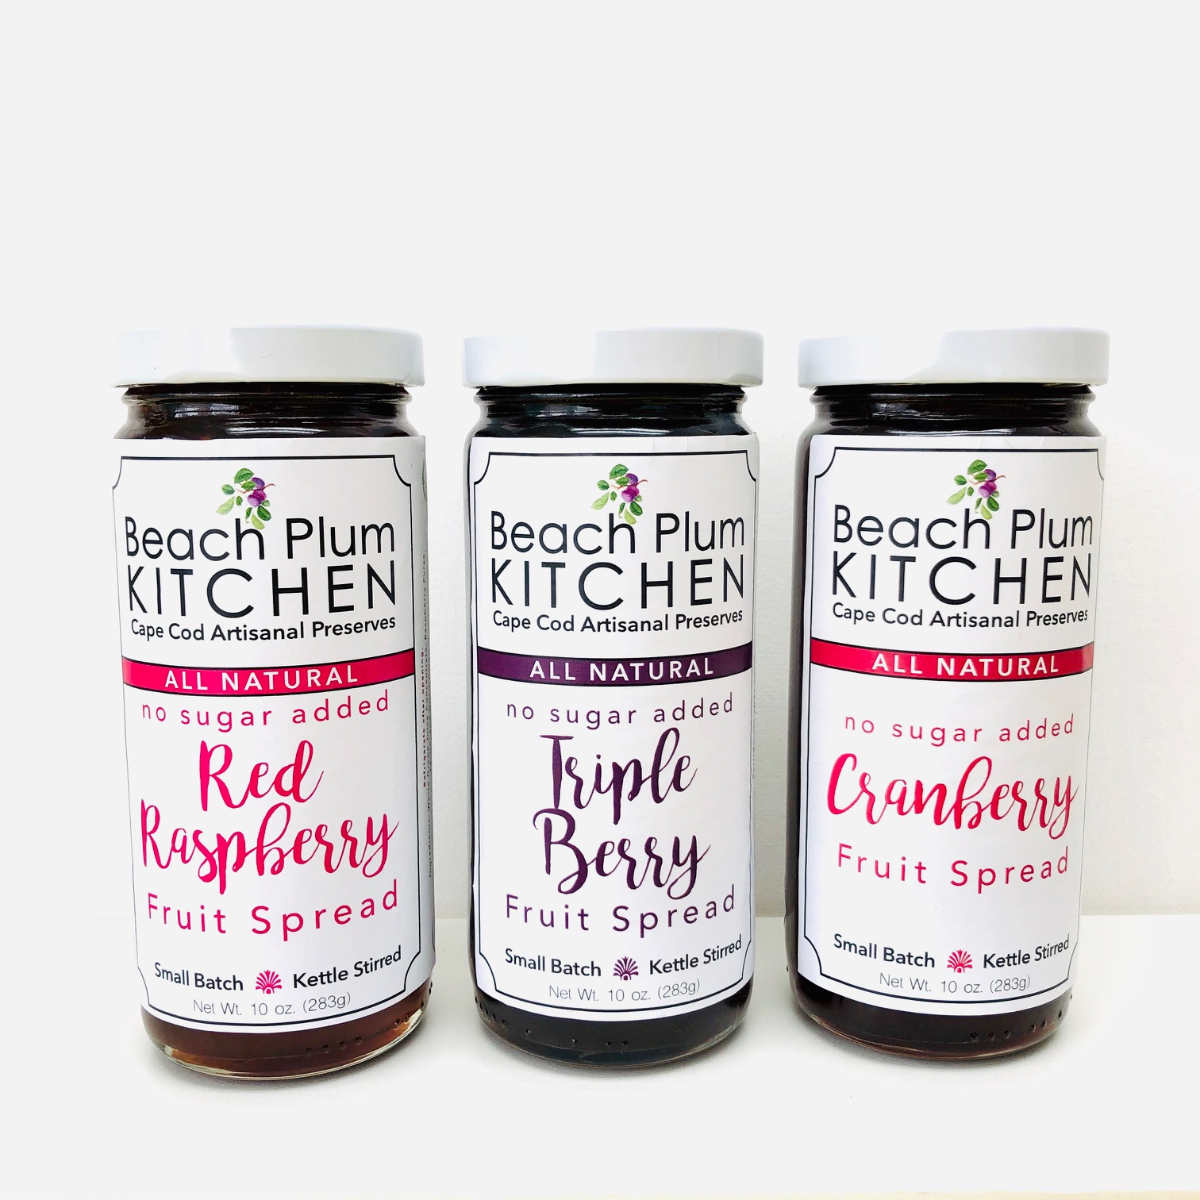 Take home the Taste of Cape Cod! | Beach Plum Kitchen gourmet preserves | LaBelle's General Store